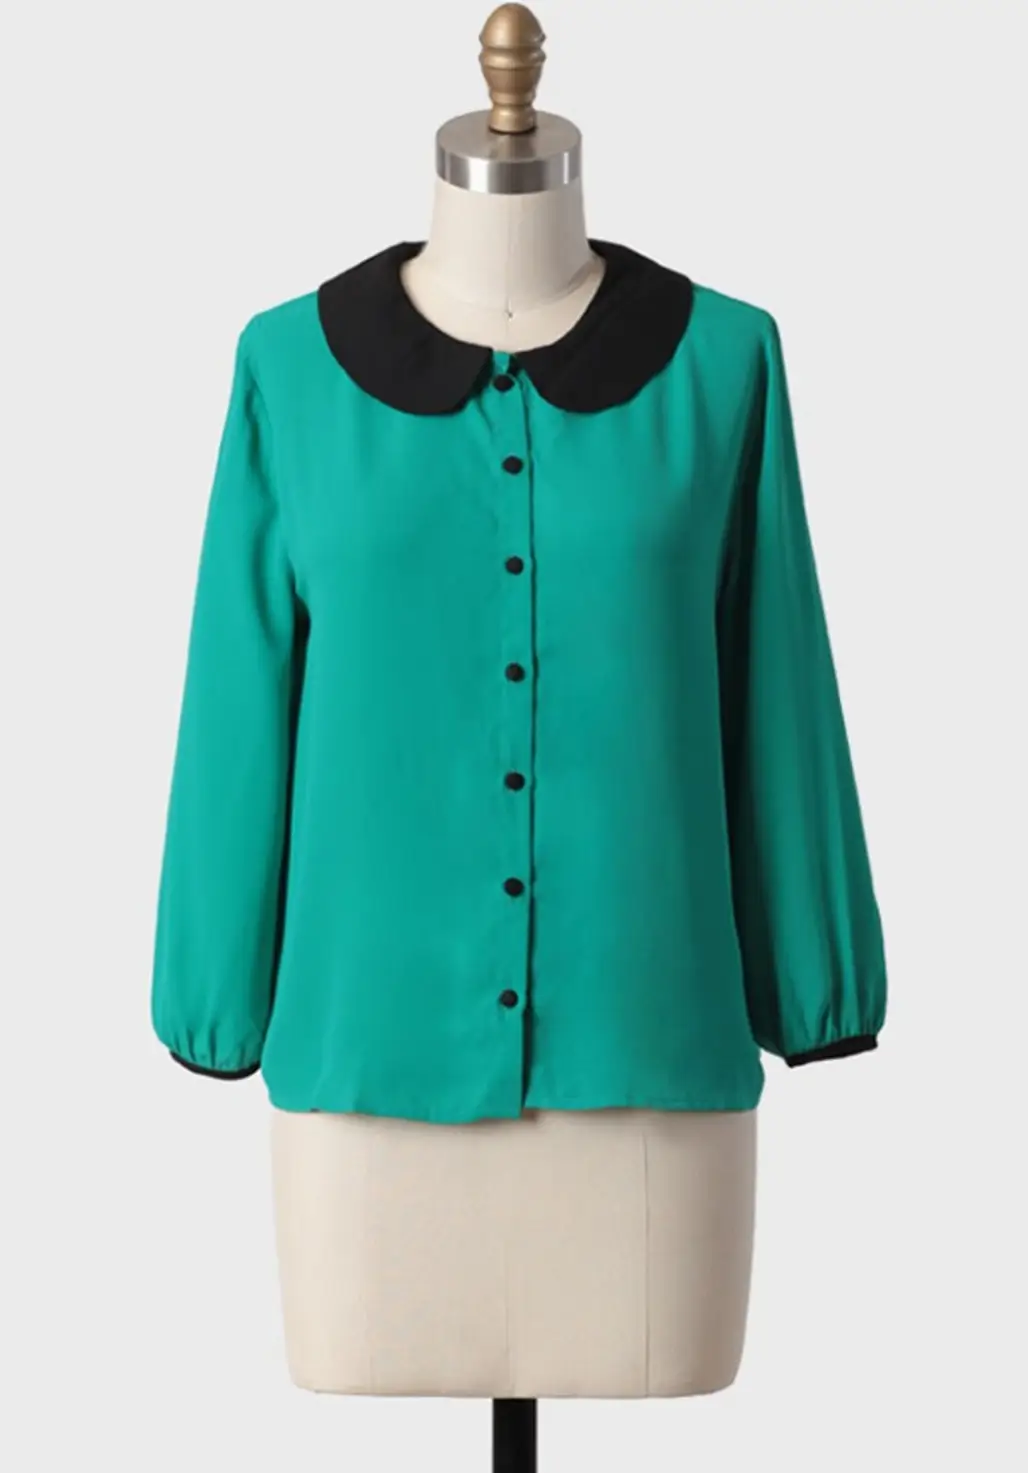 Ruche – Charming Collared Blouse